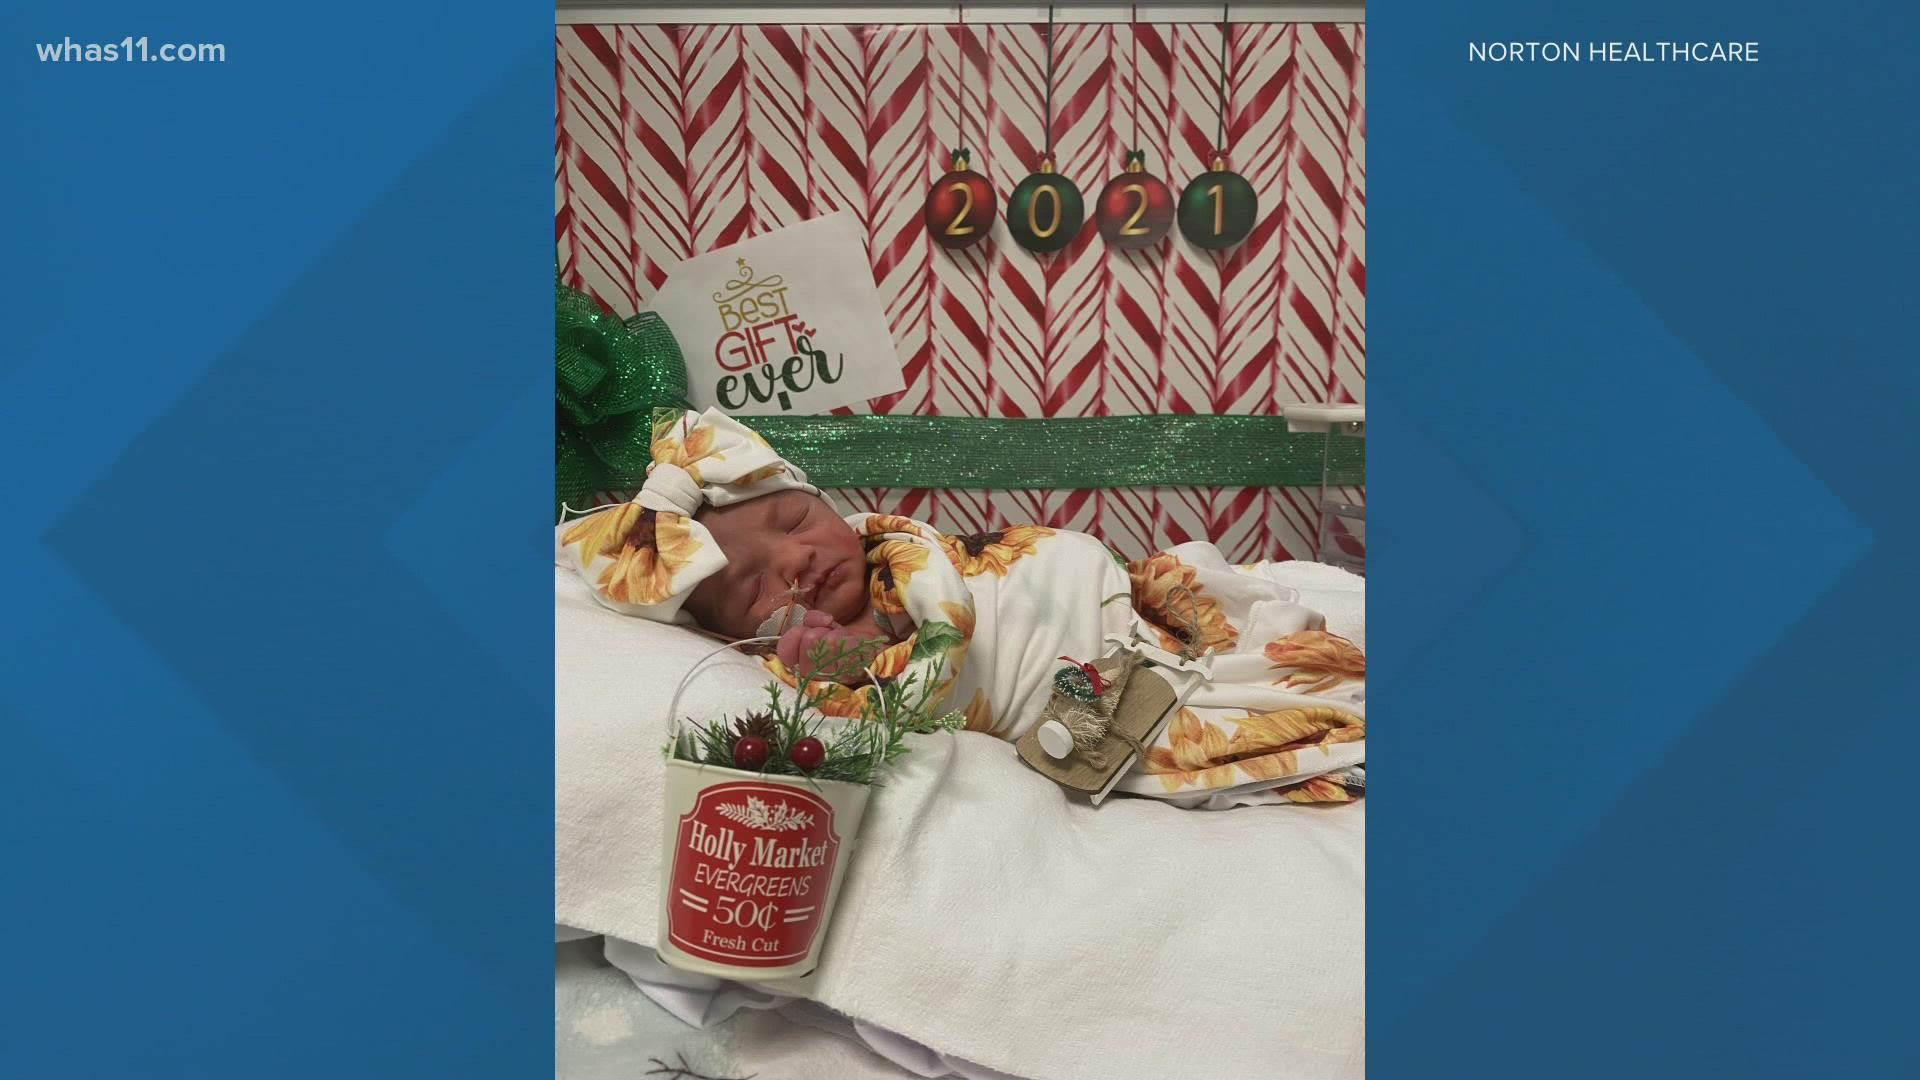 These babies are celebrating their first Christmas in the NICU, so the hospital hosted a party for their families.